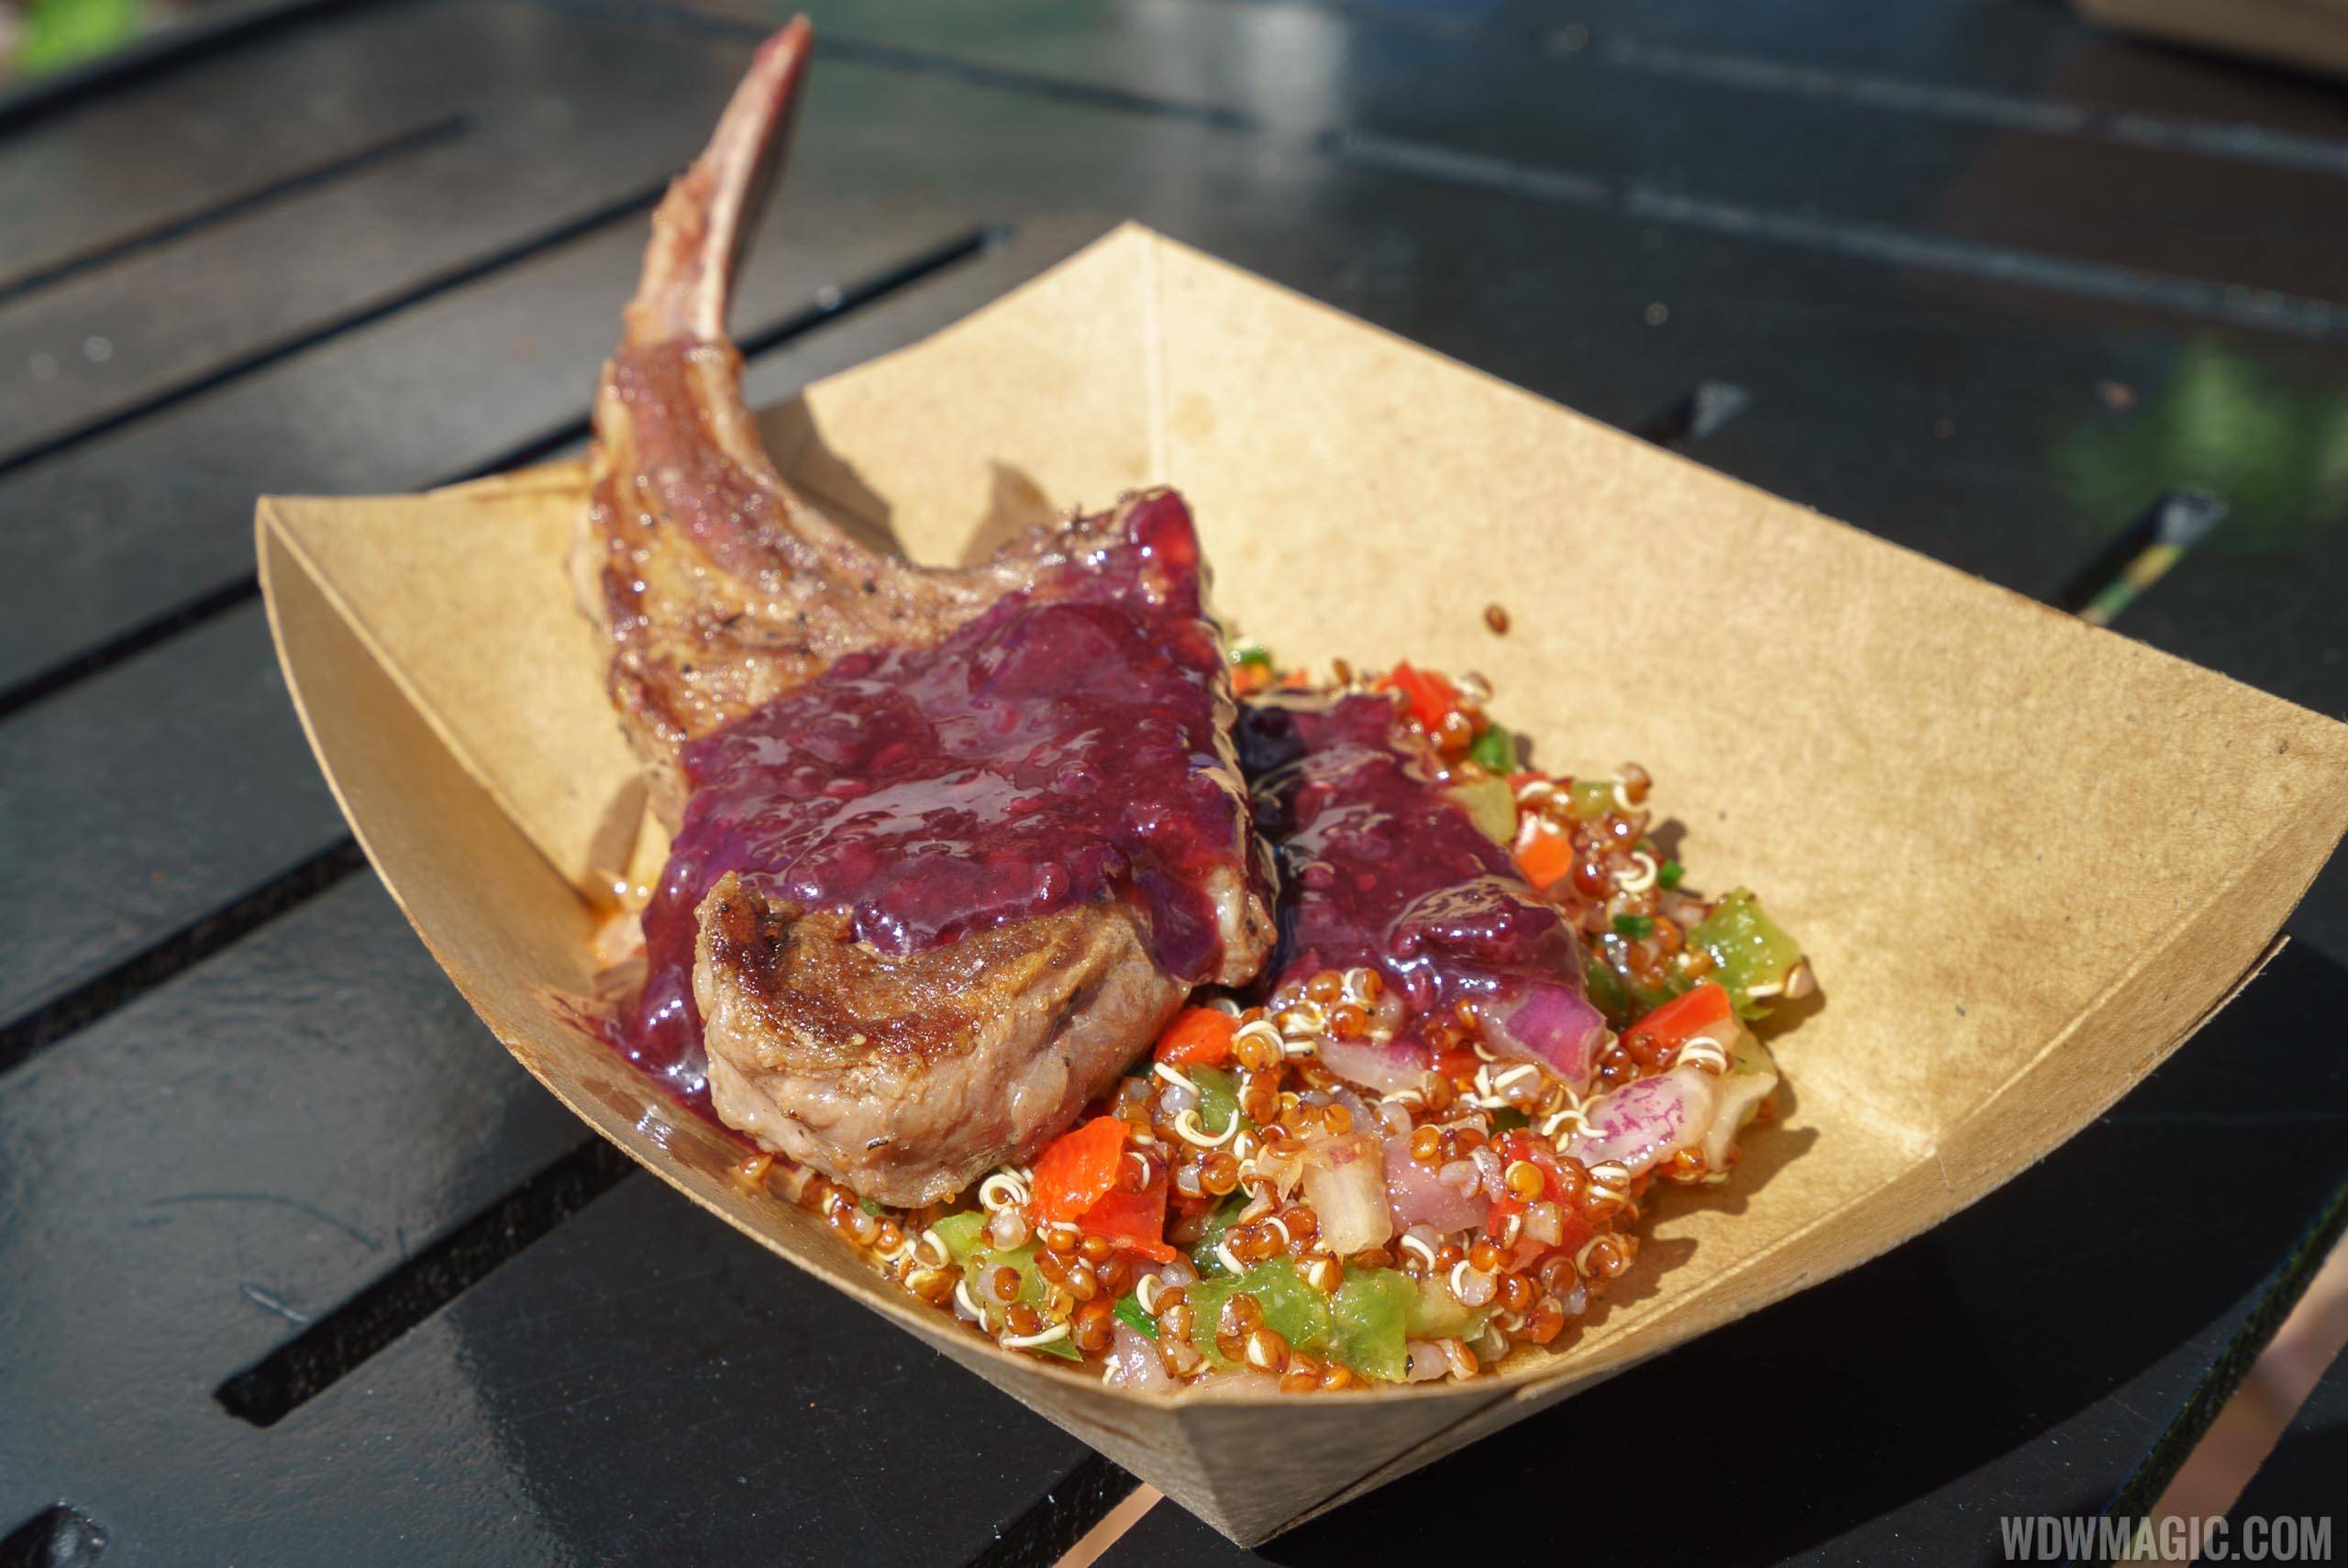 The Berry Basket - Lamb Chop with Quinoa Salad and Blackberry Gastrique